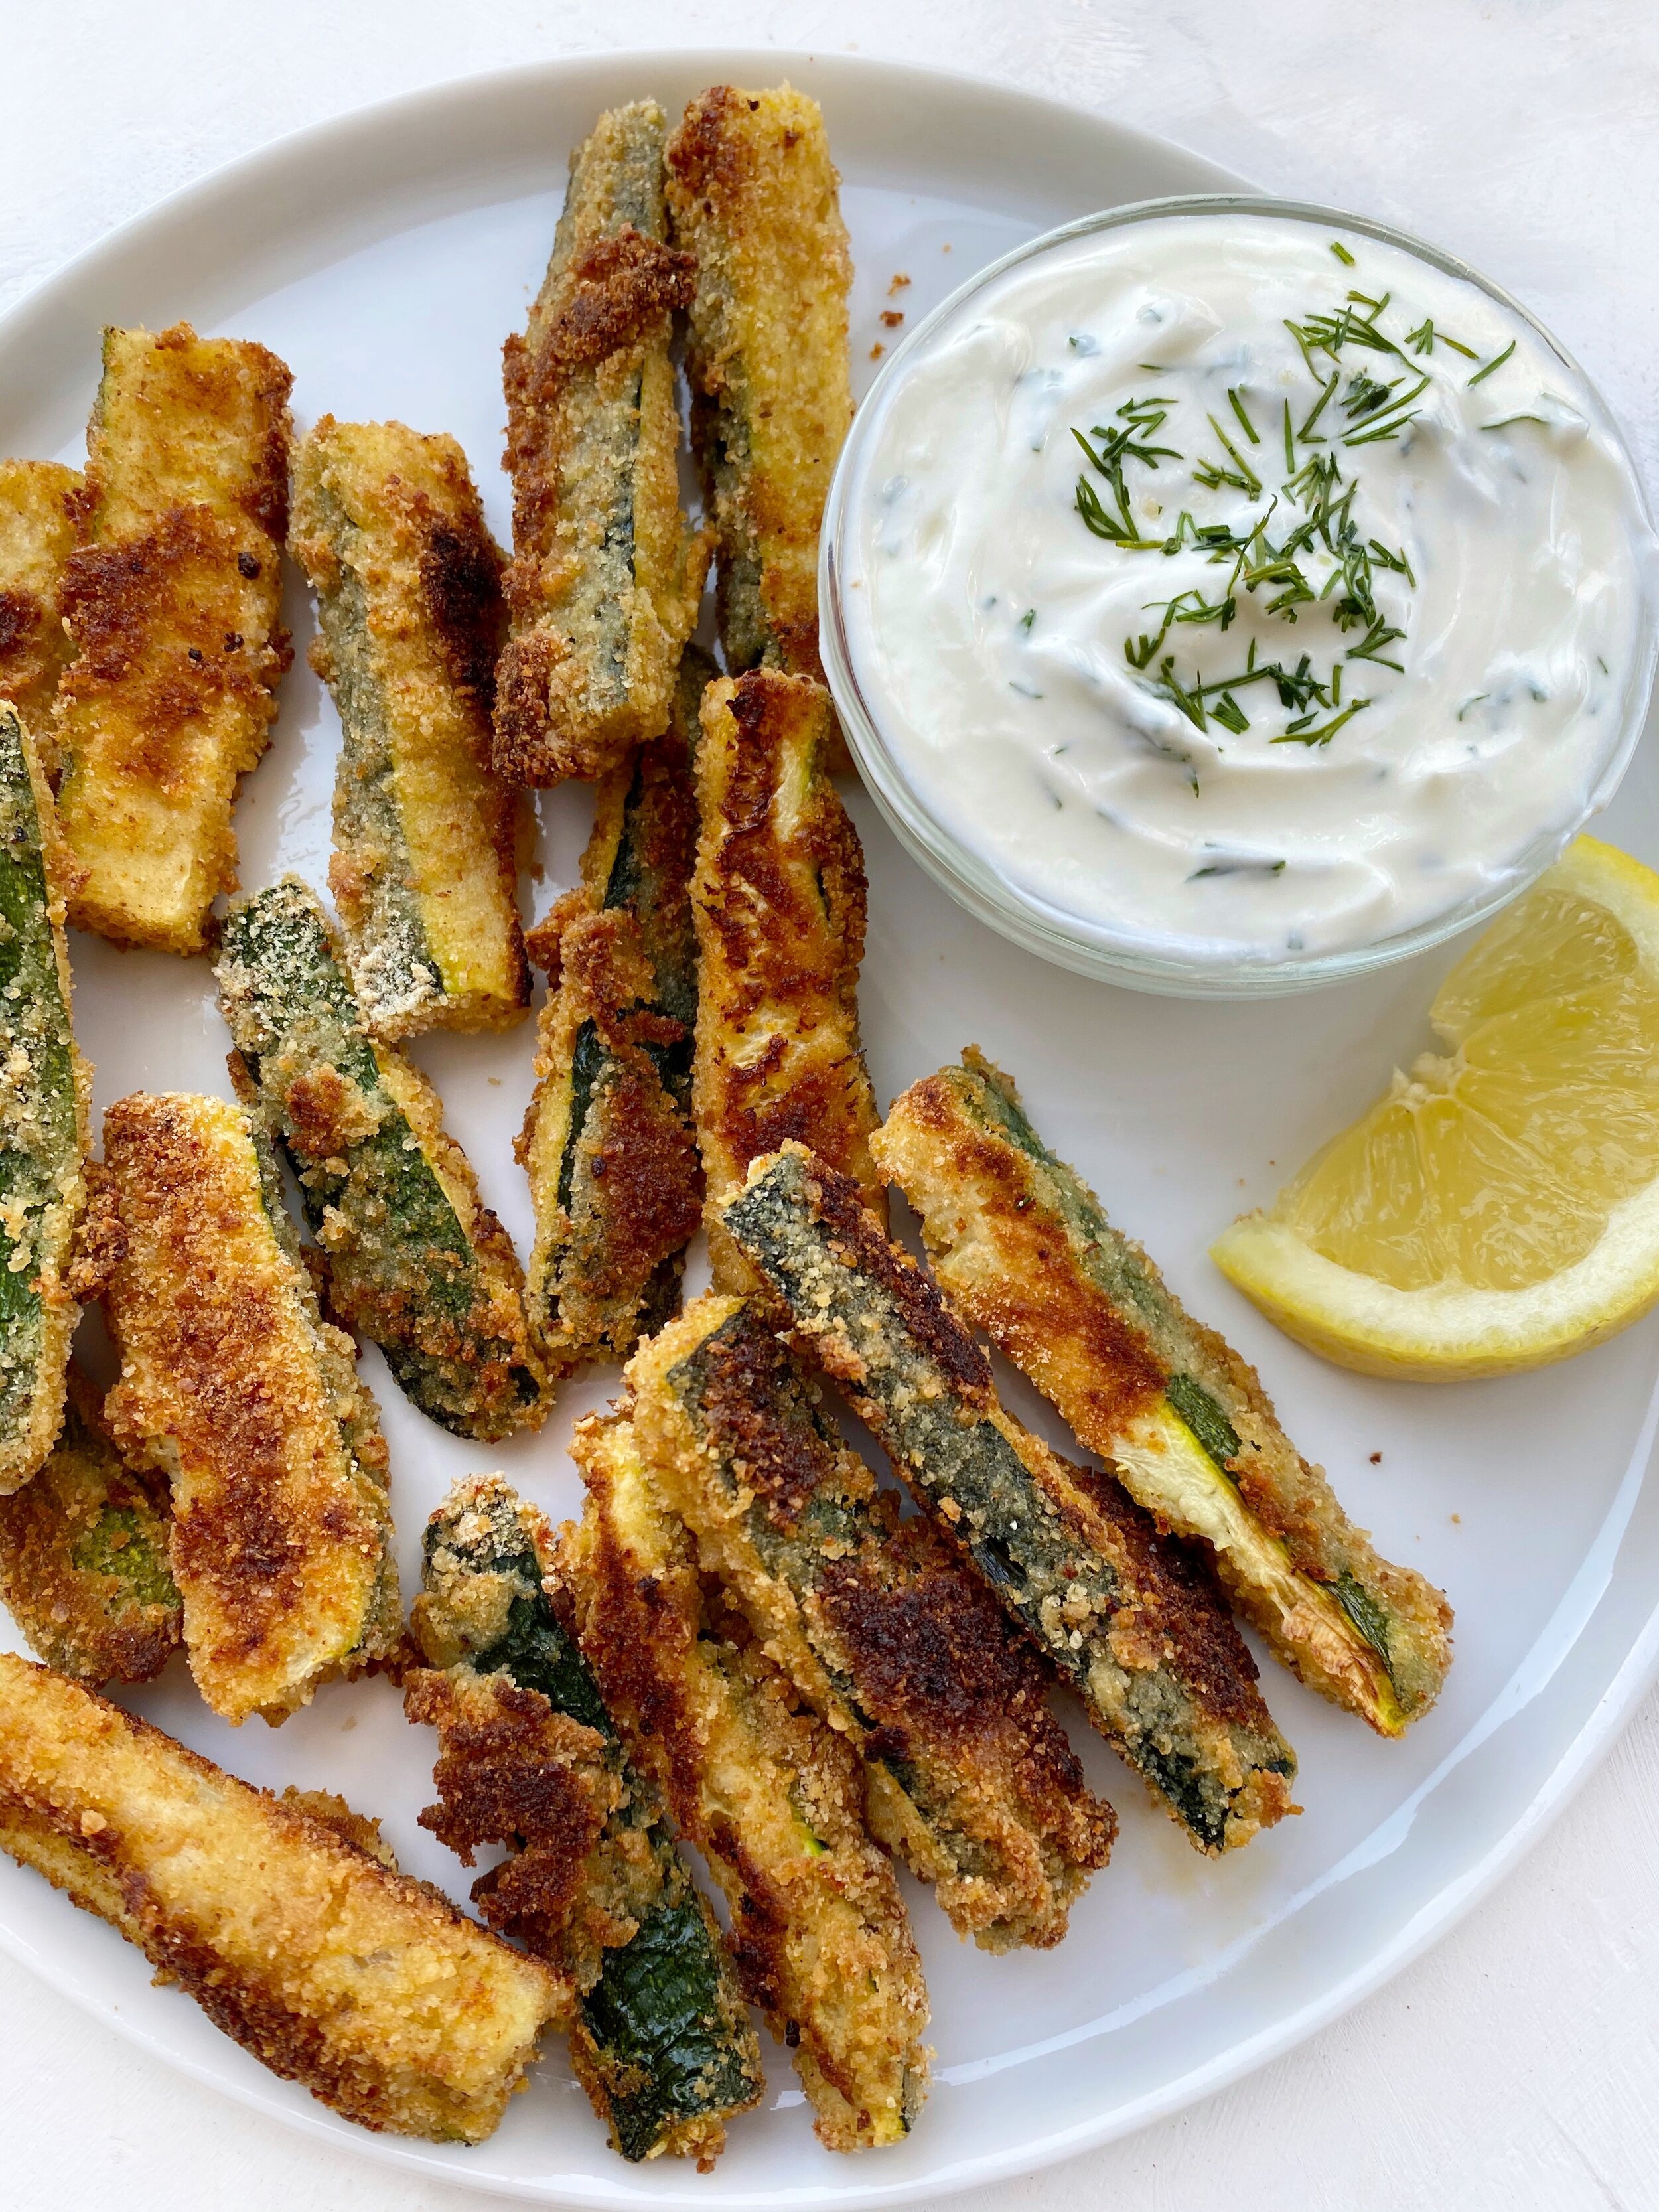 Baked Zucchini Fries And Greek Yogurt Dip With A Secret Ingredient You Need To Know About Sammi Brondo Nyc Based Registered Dietitian Nutritionist